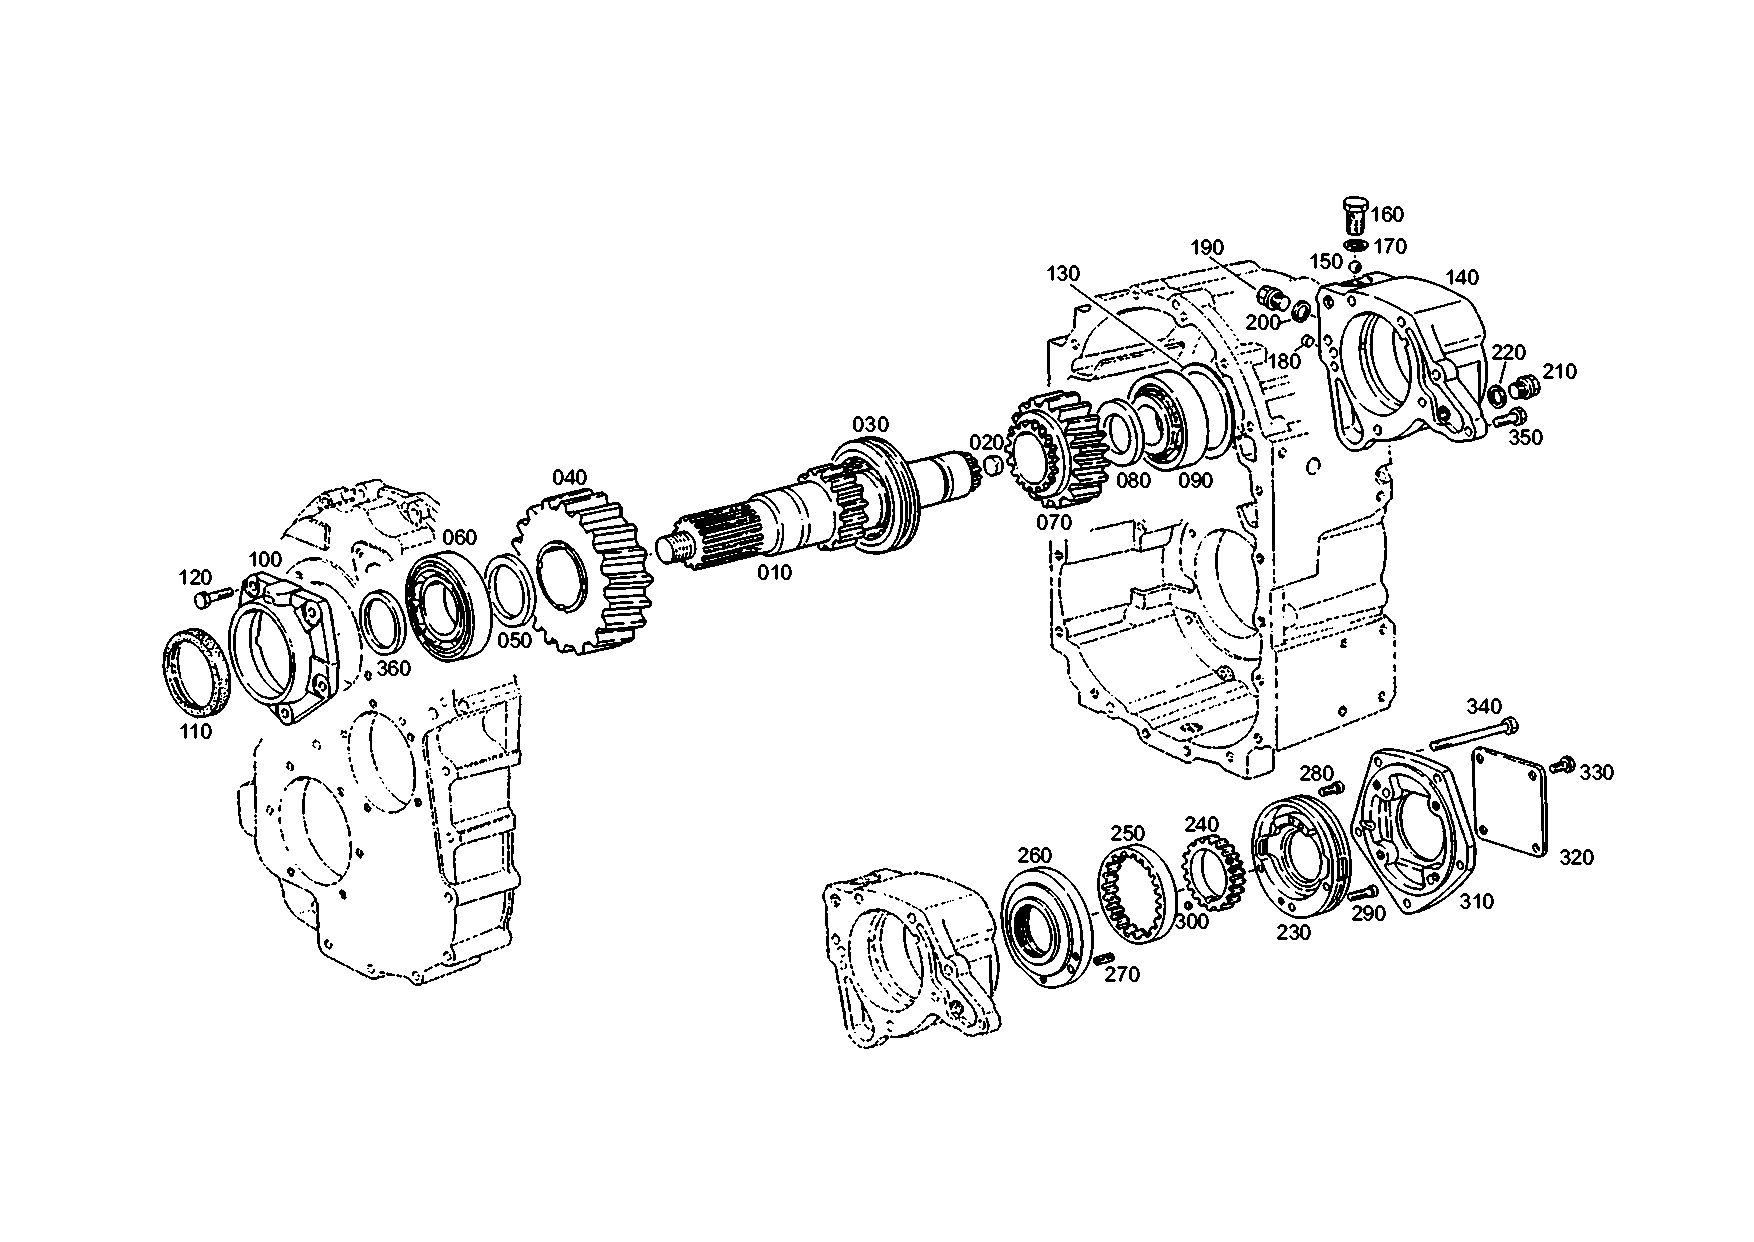 drawing for MARMON Herring MVG121059 - INPUT GEAR